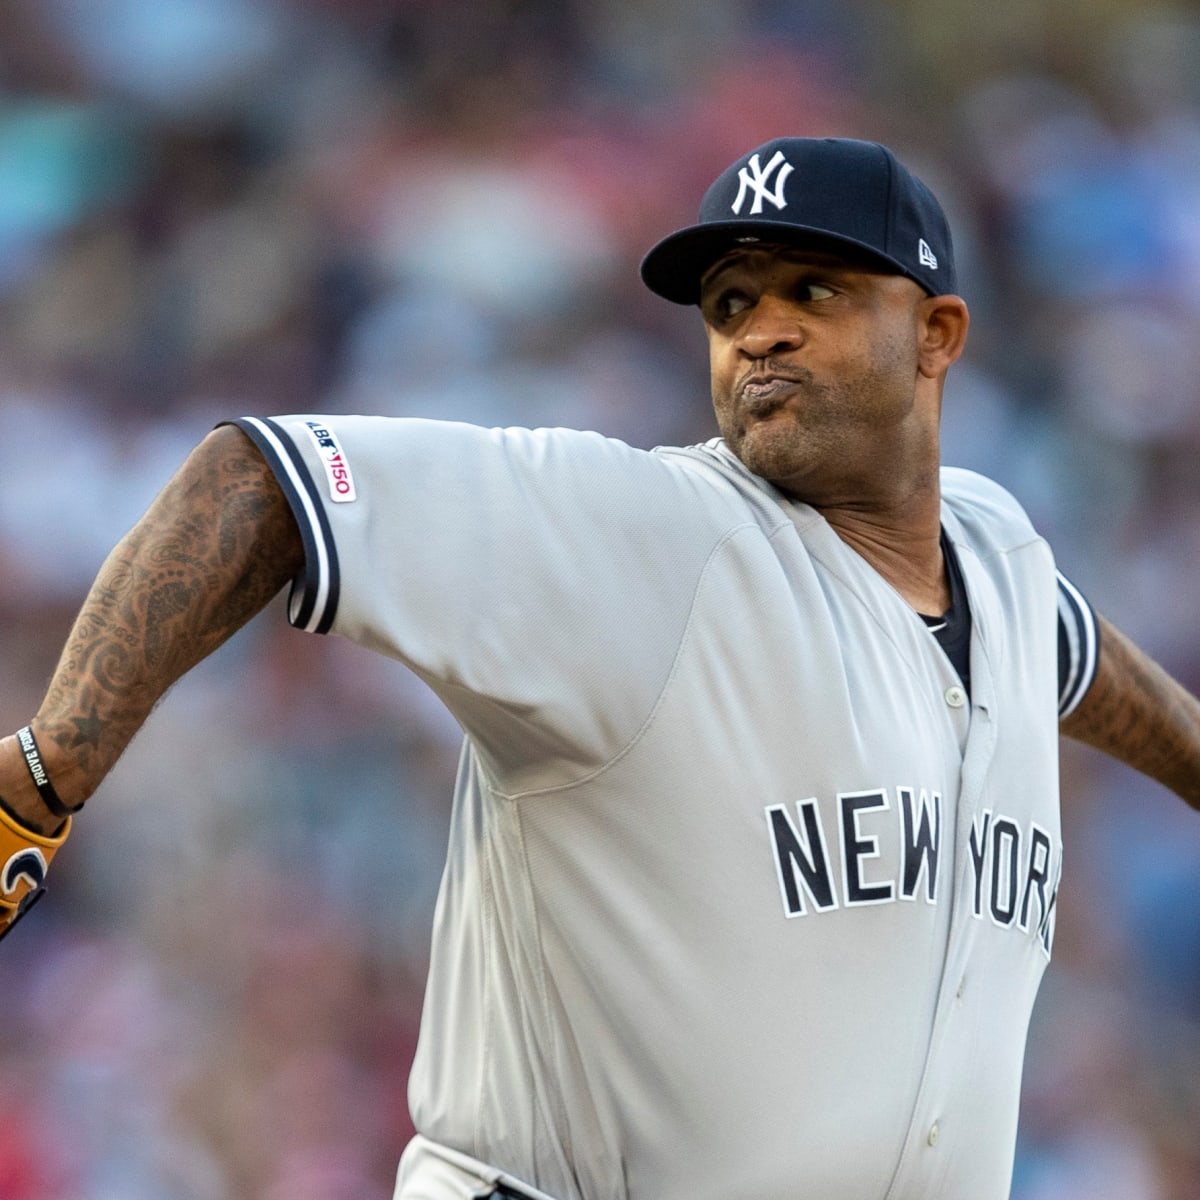 Former Yankees ace CC Sabathia has put on some serious muscle